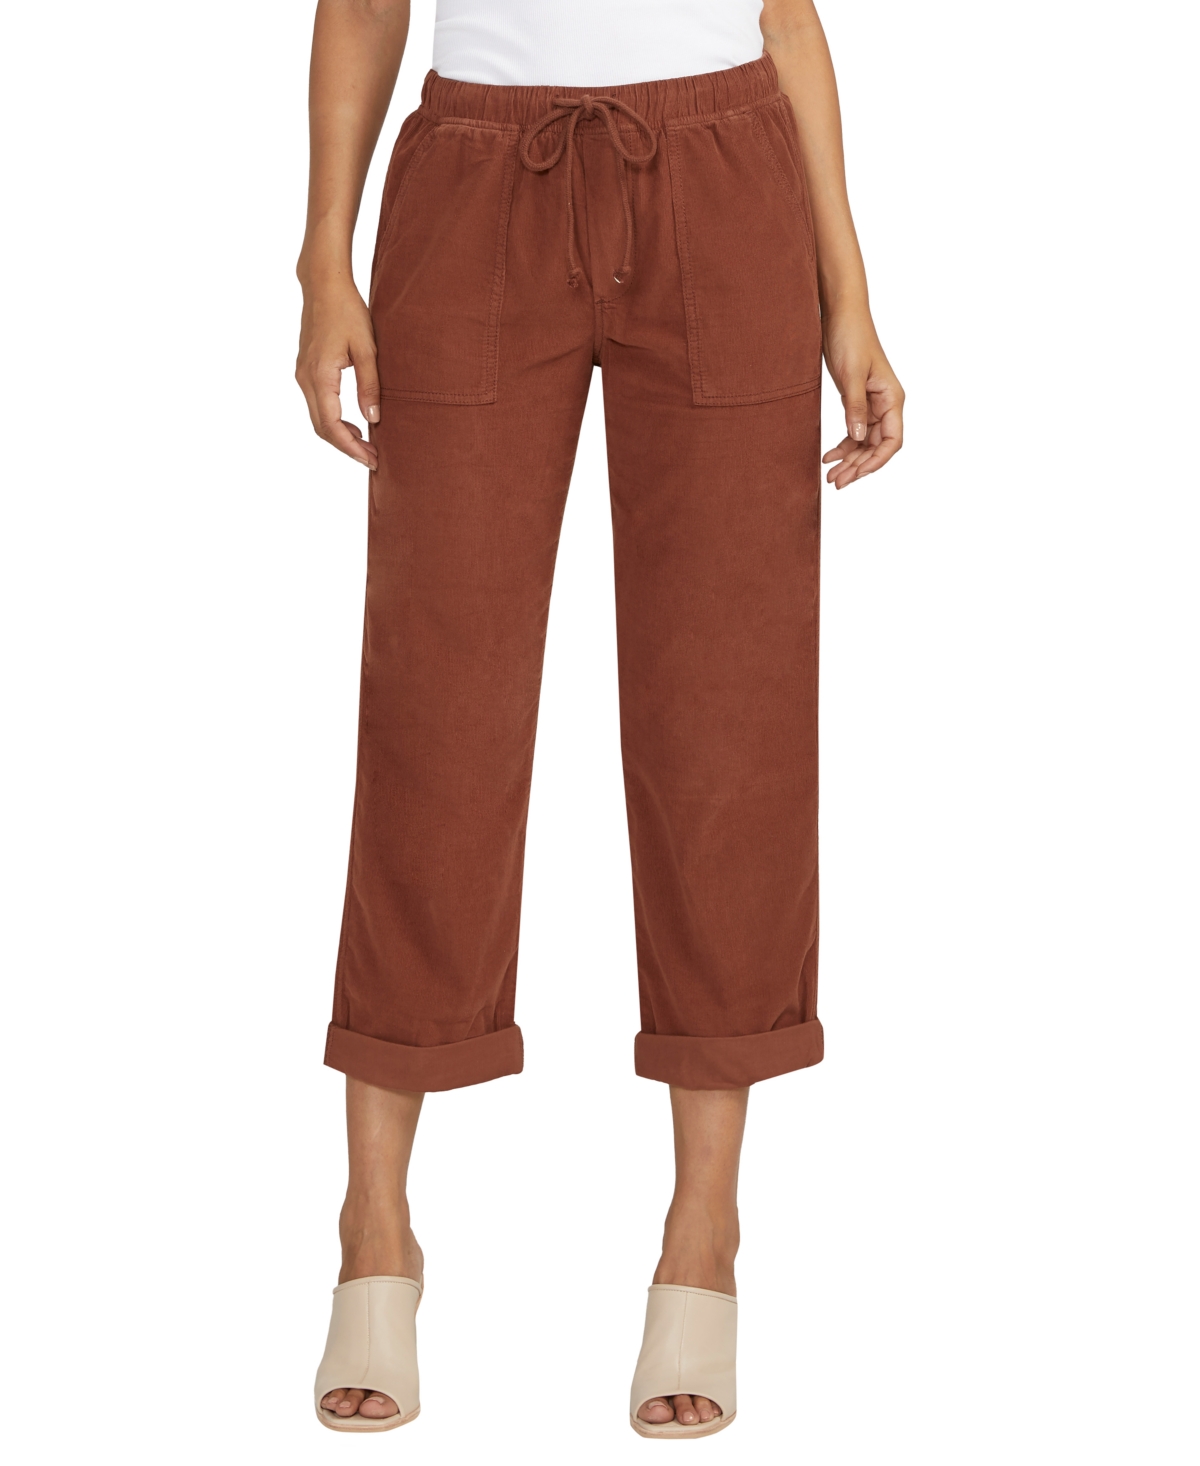 Women's Relaxed Drawstring Pants - Olive